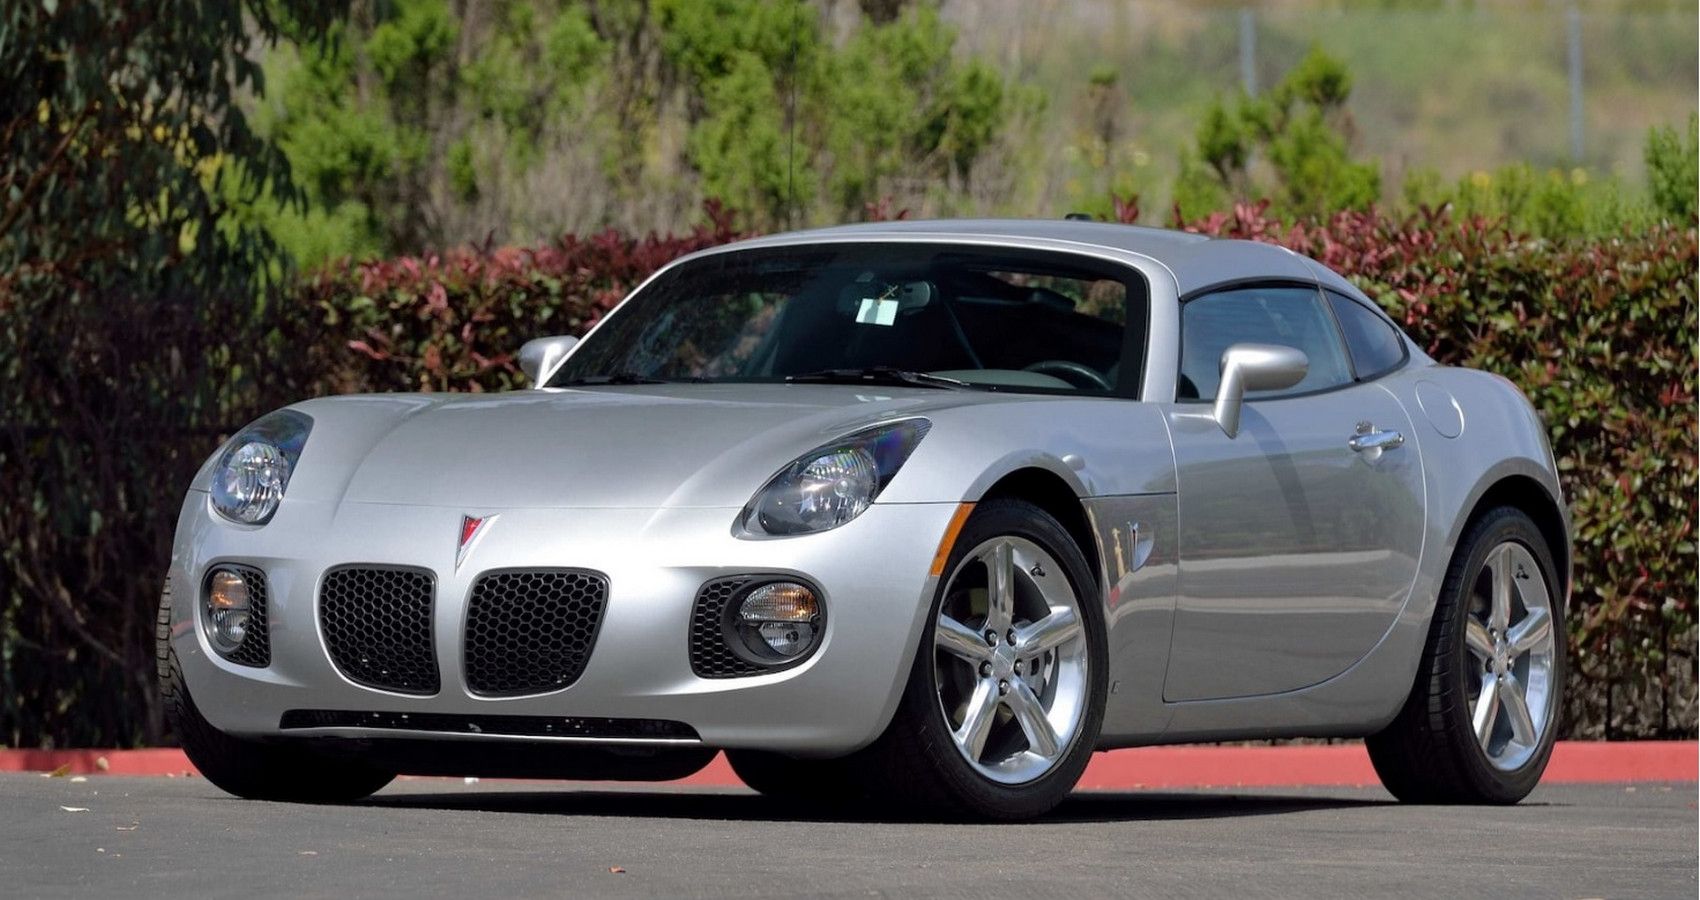 10 Awesome American Cars You Can Buy For Less Than $10,000